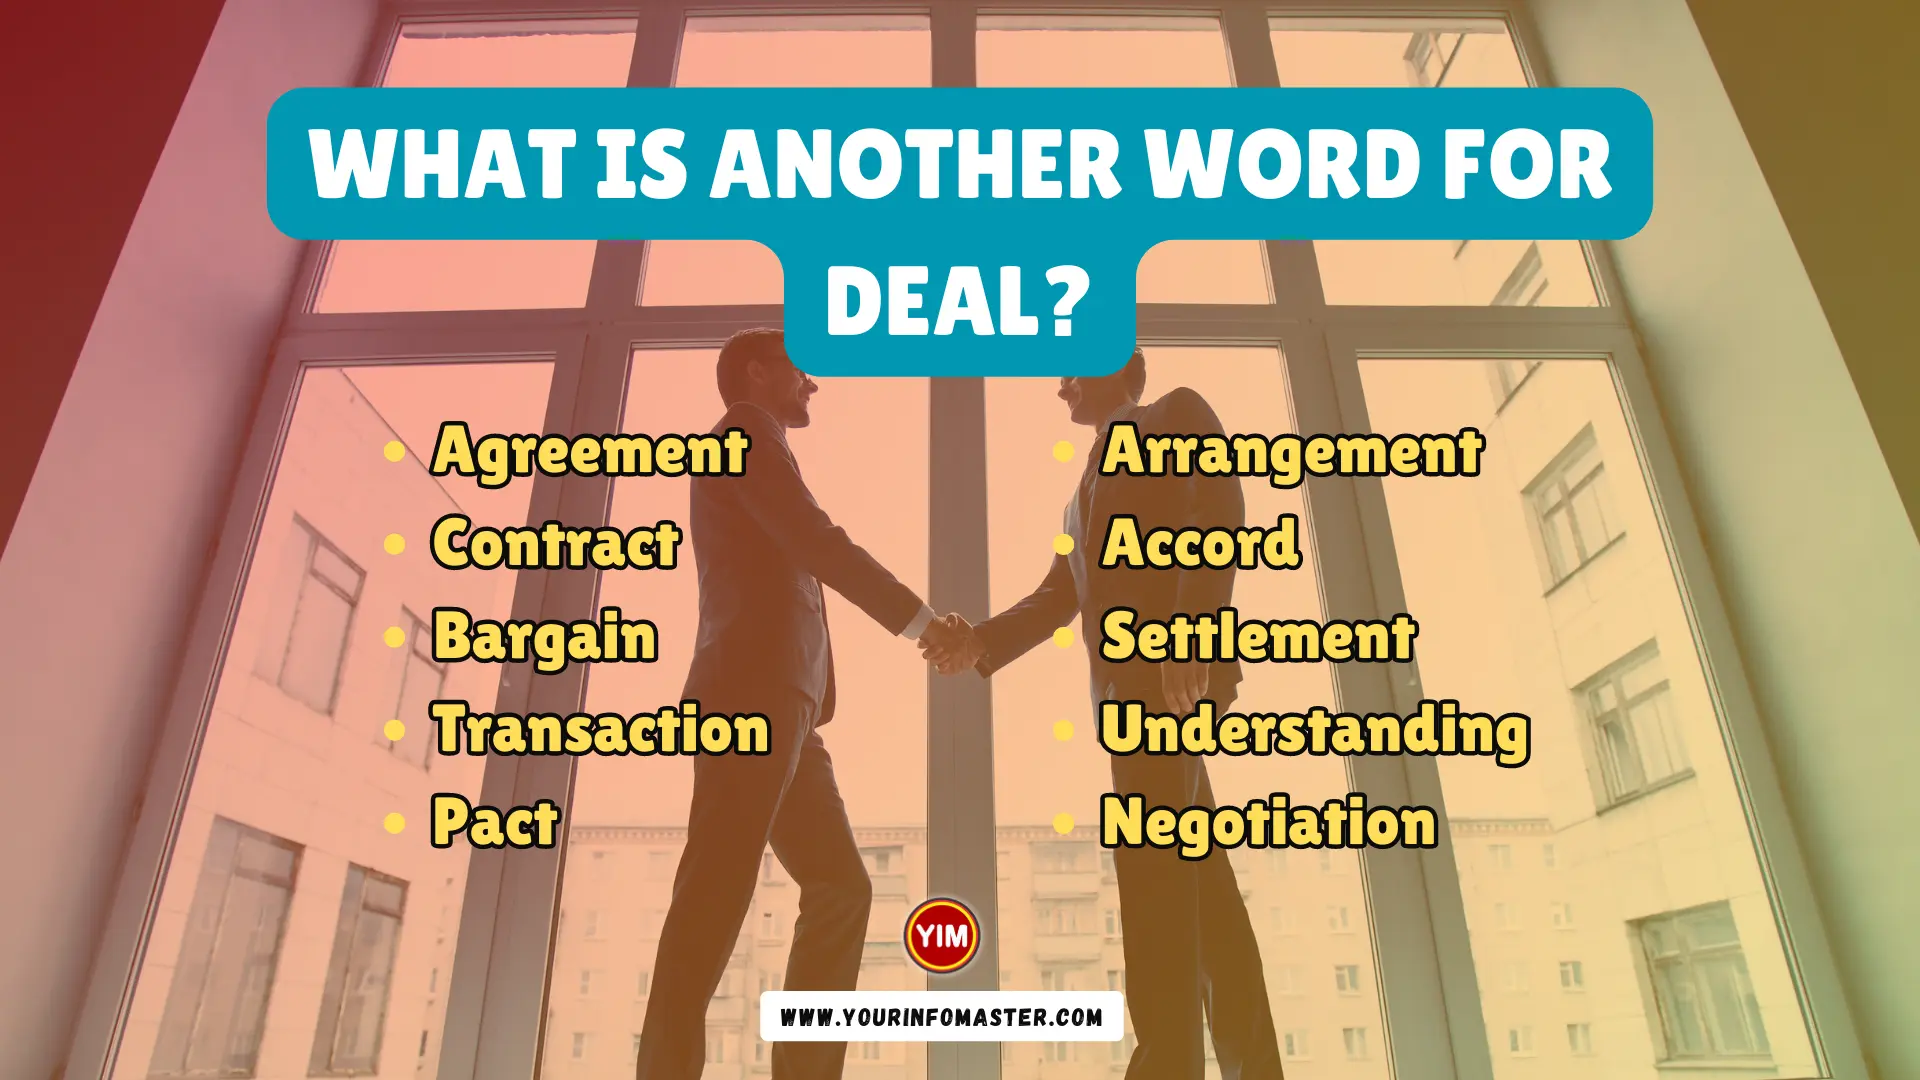 What is another word for Deal